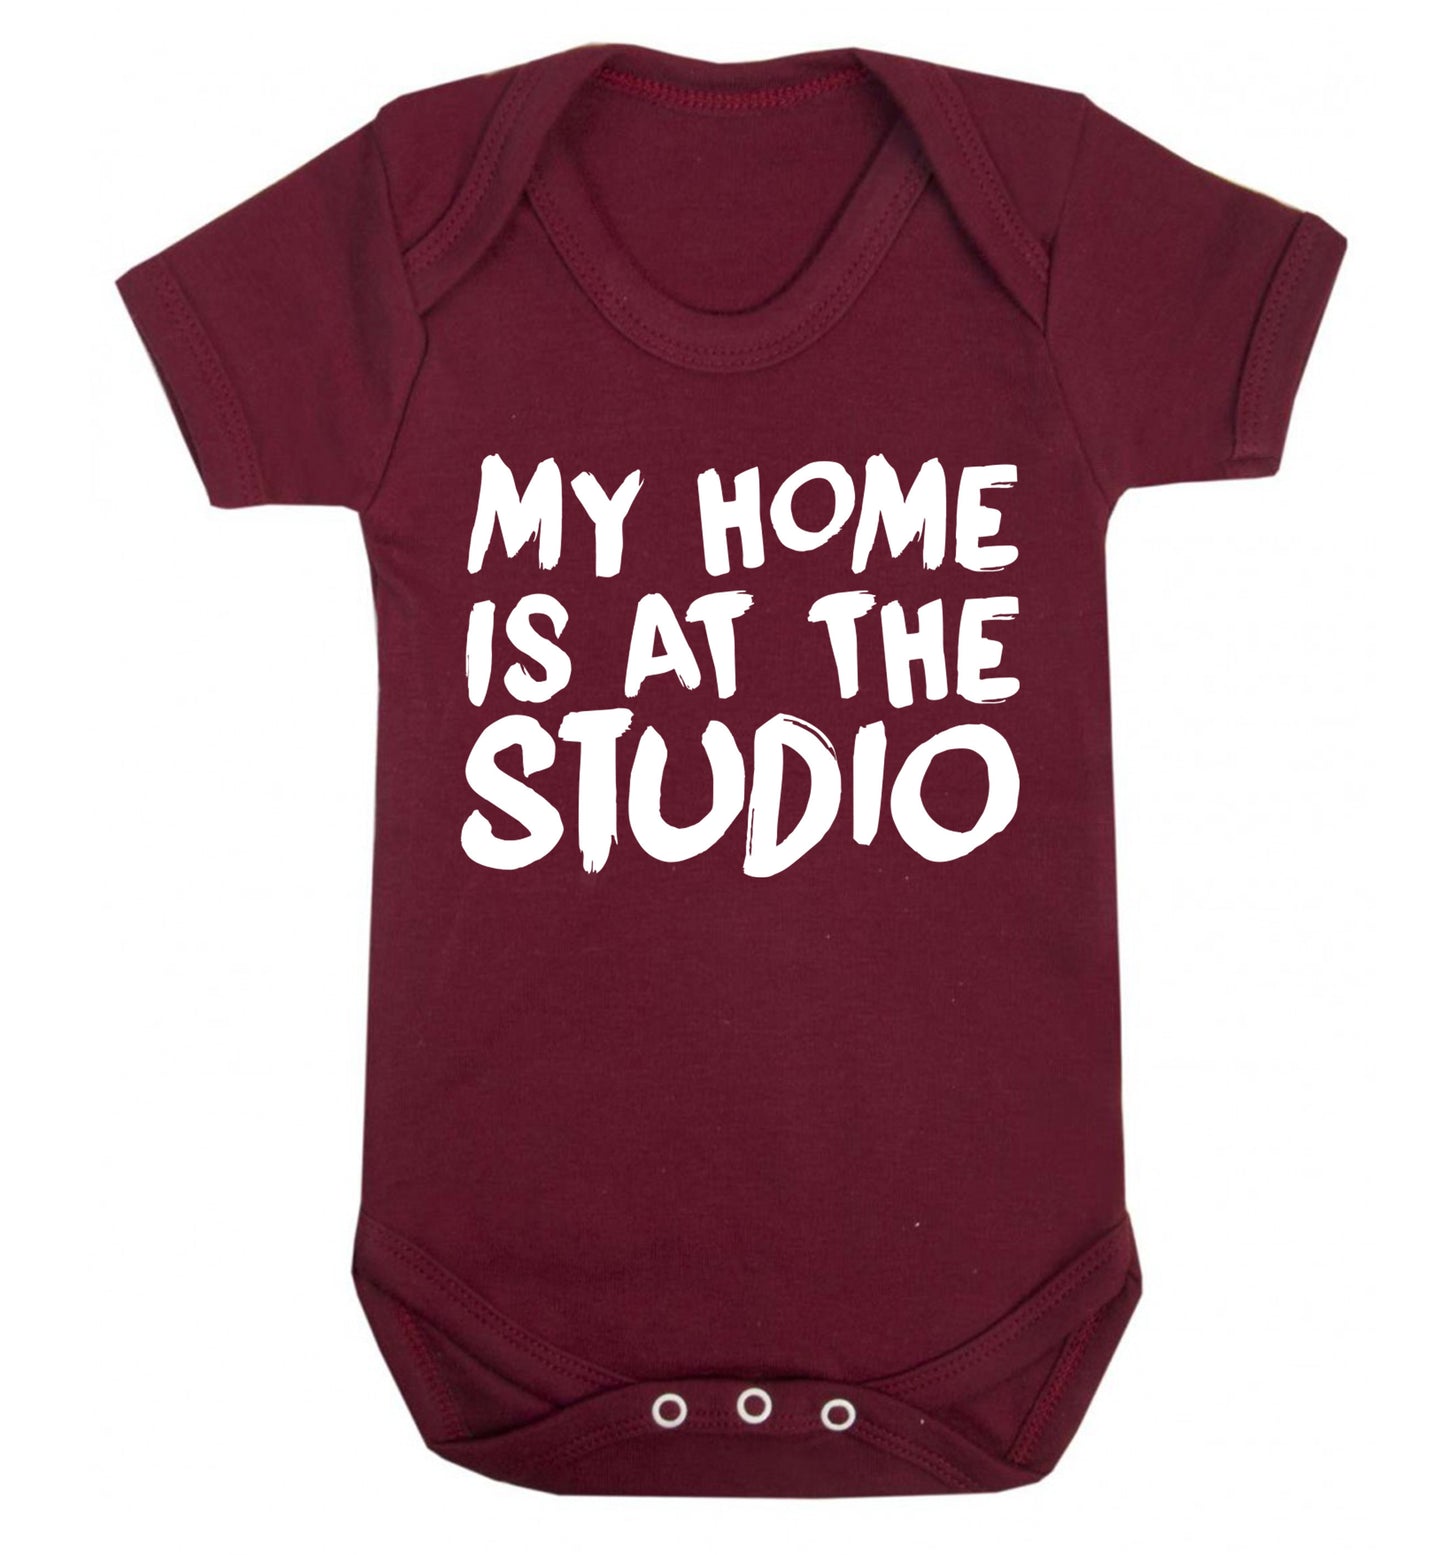 My home is at the studio Baby Vest maroon 18-24 months